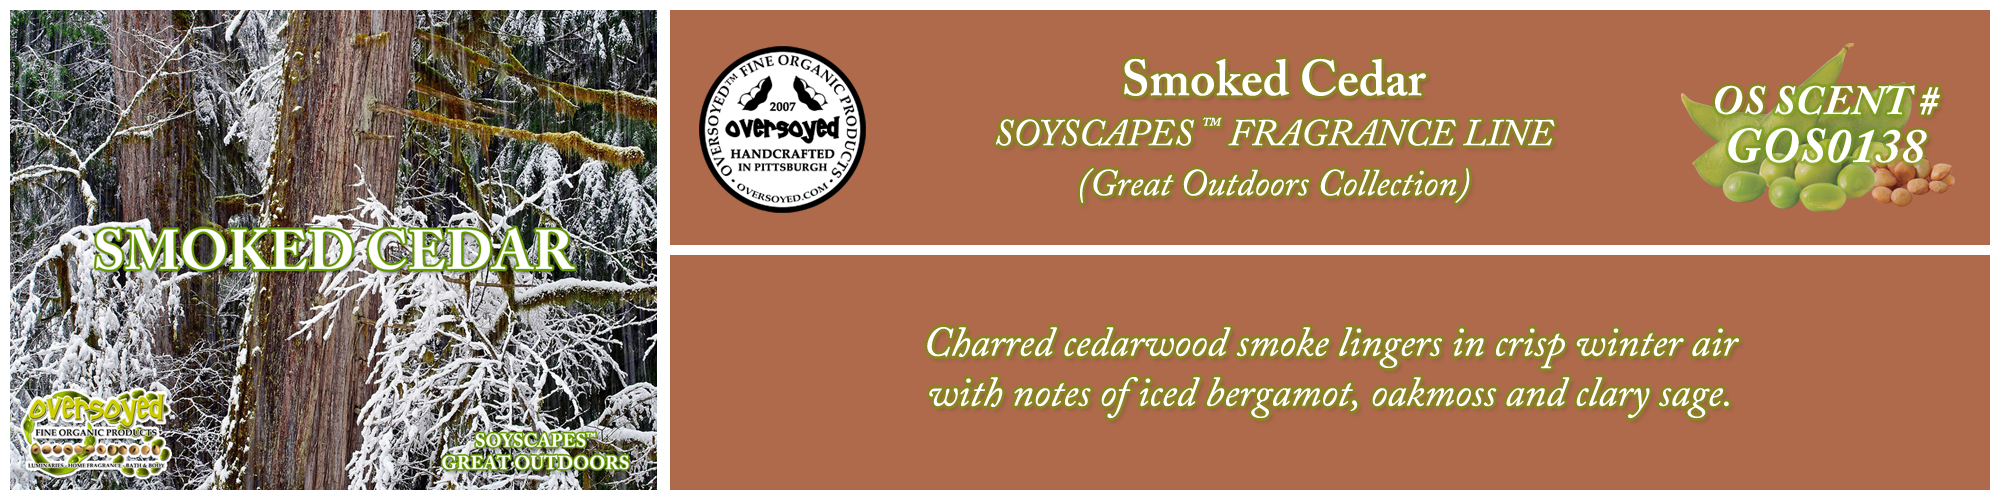 Smoked Cedar Handcrafted Products Collection